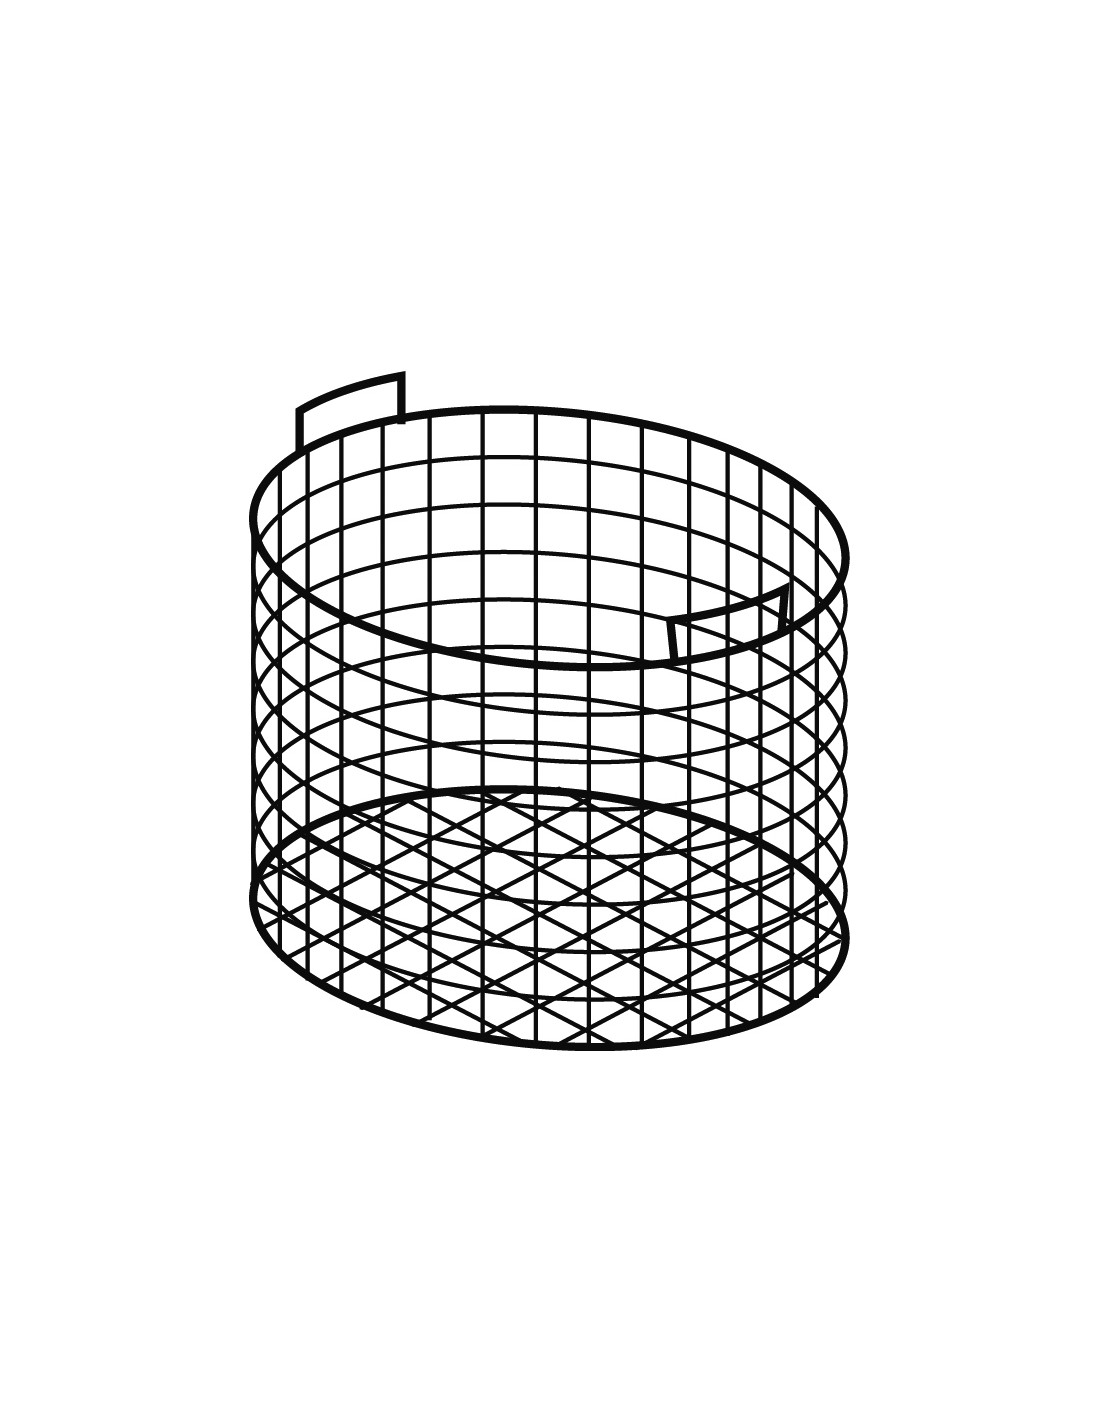 Basket 1/1 for cooking pan - Lt 100 - Size cm 56 x 34.5 h